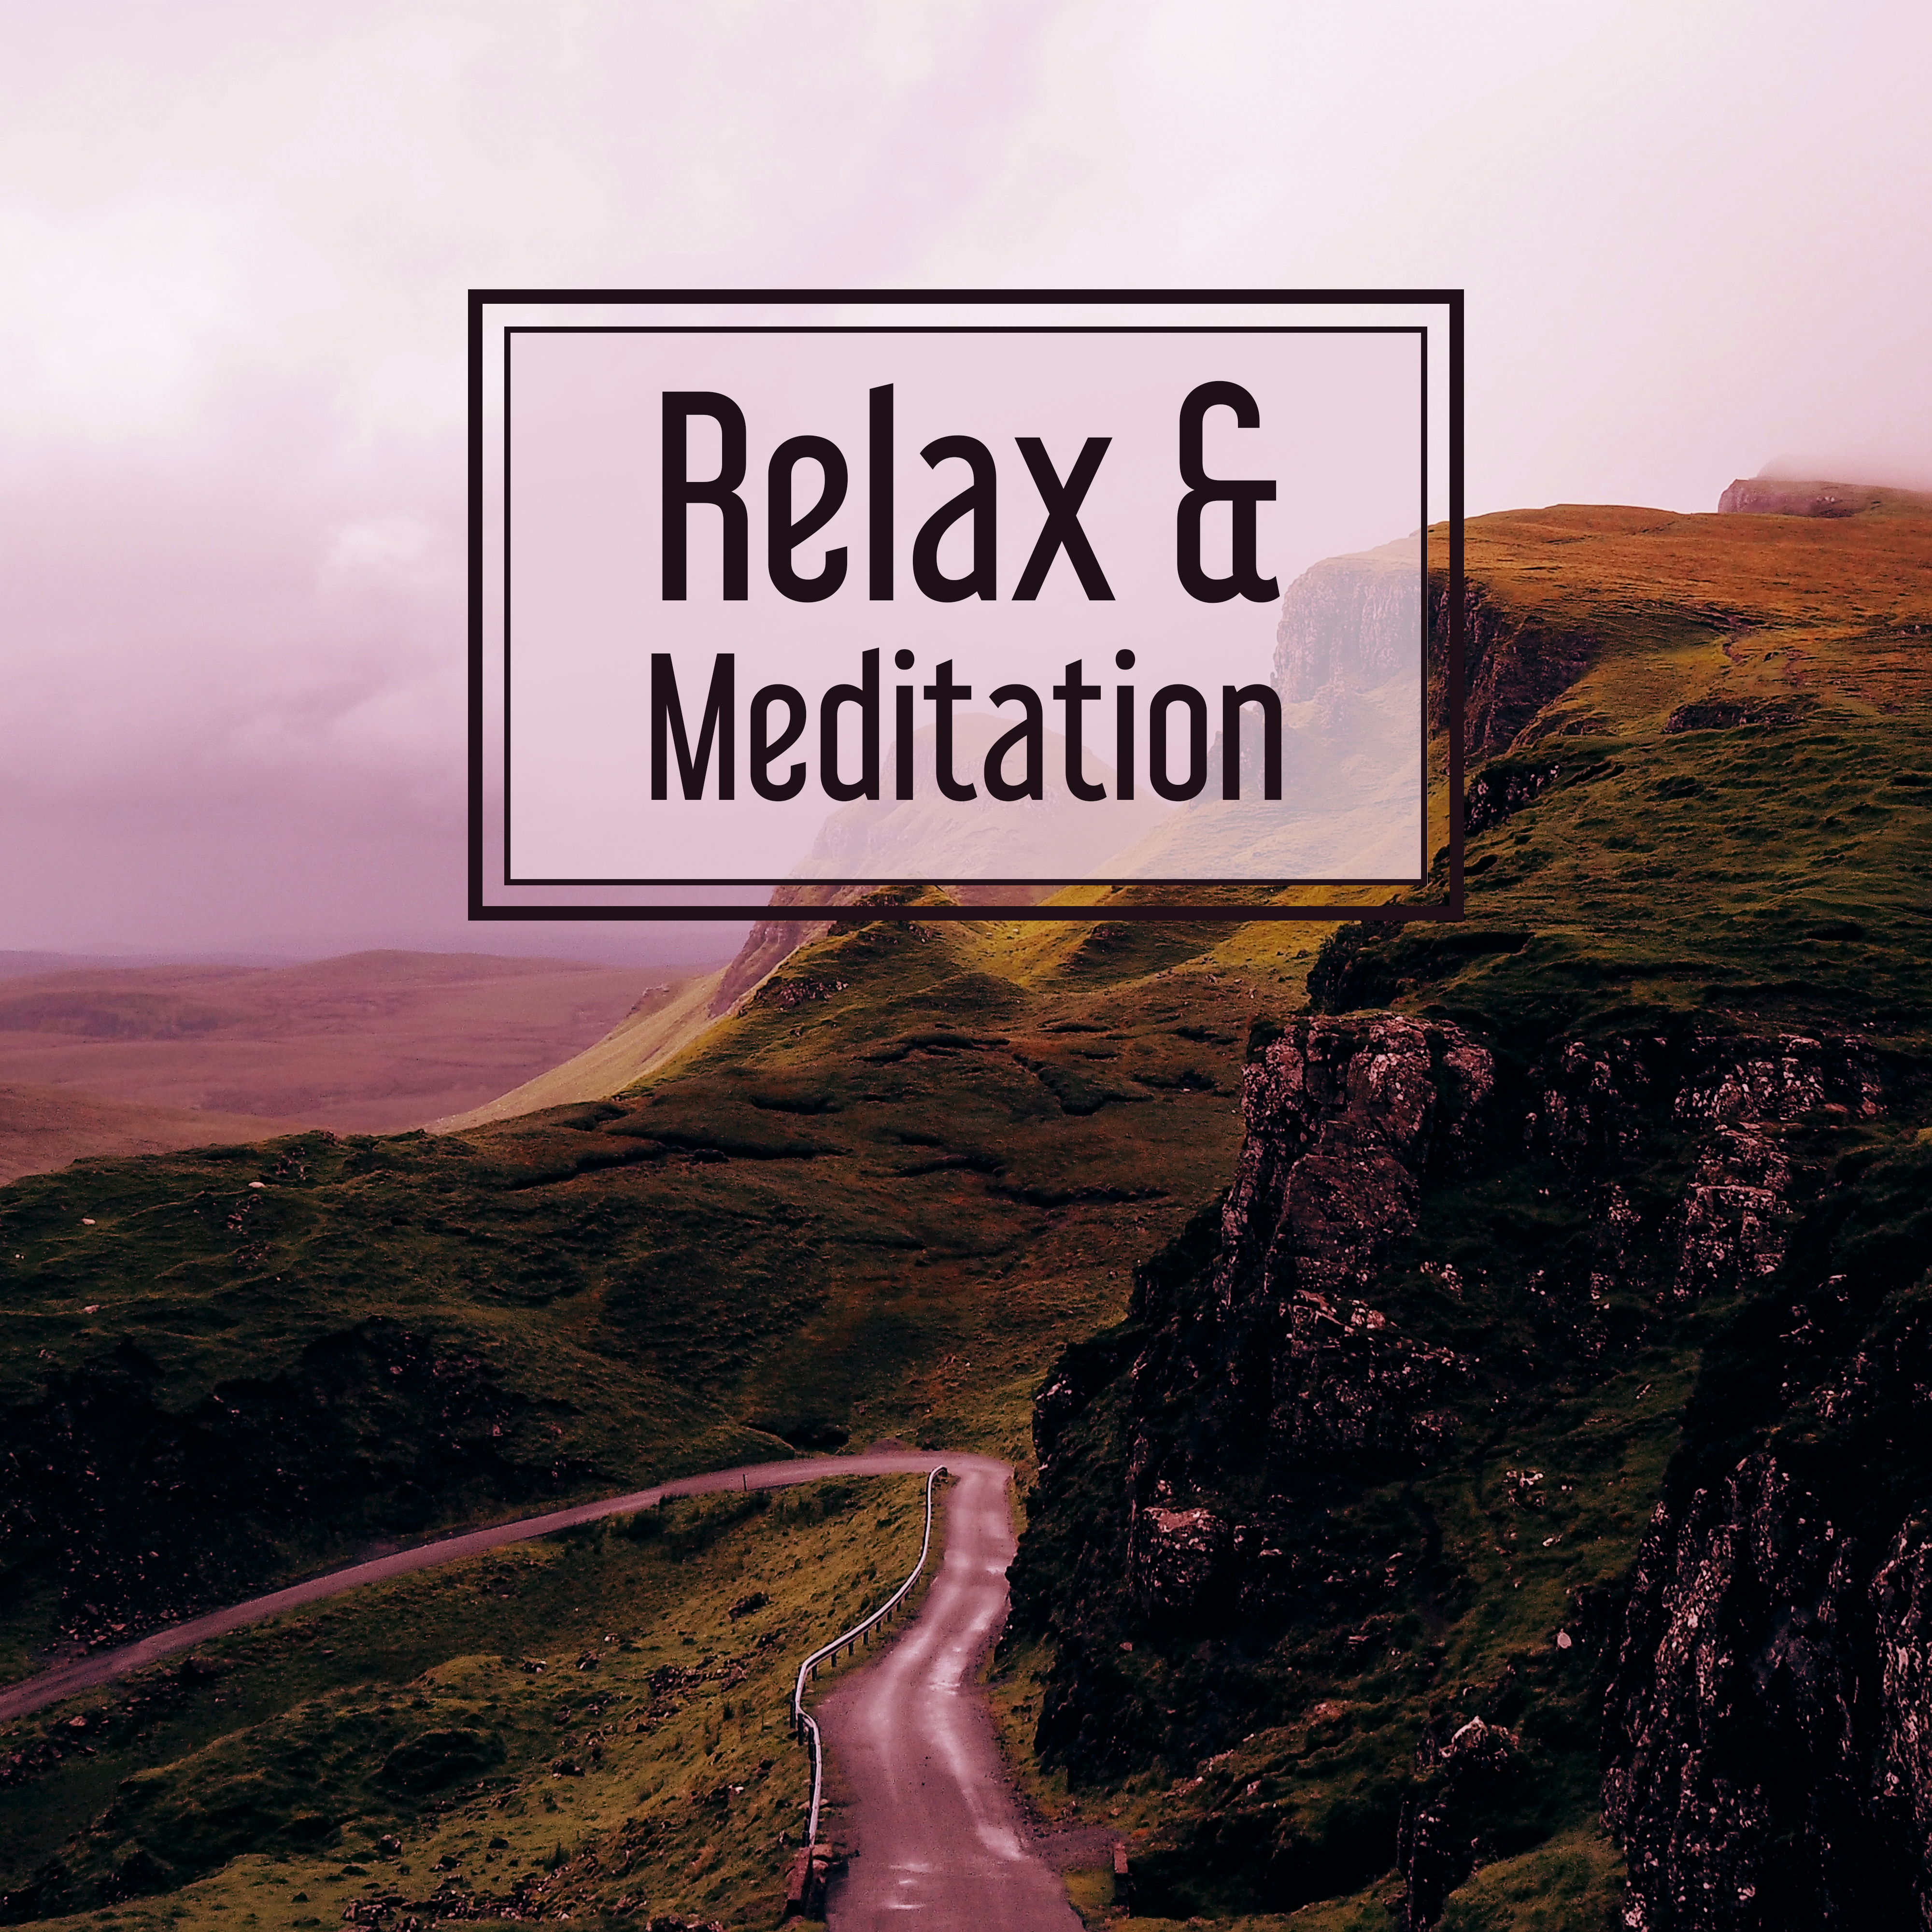 Relax & Meditation – Therapy Sounds, Nature Melodies, Soothing Piano, Deep Water, Peaceful Mind, Calmness & Focus